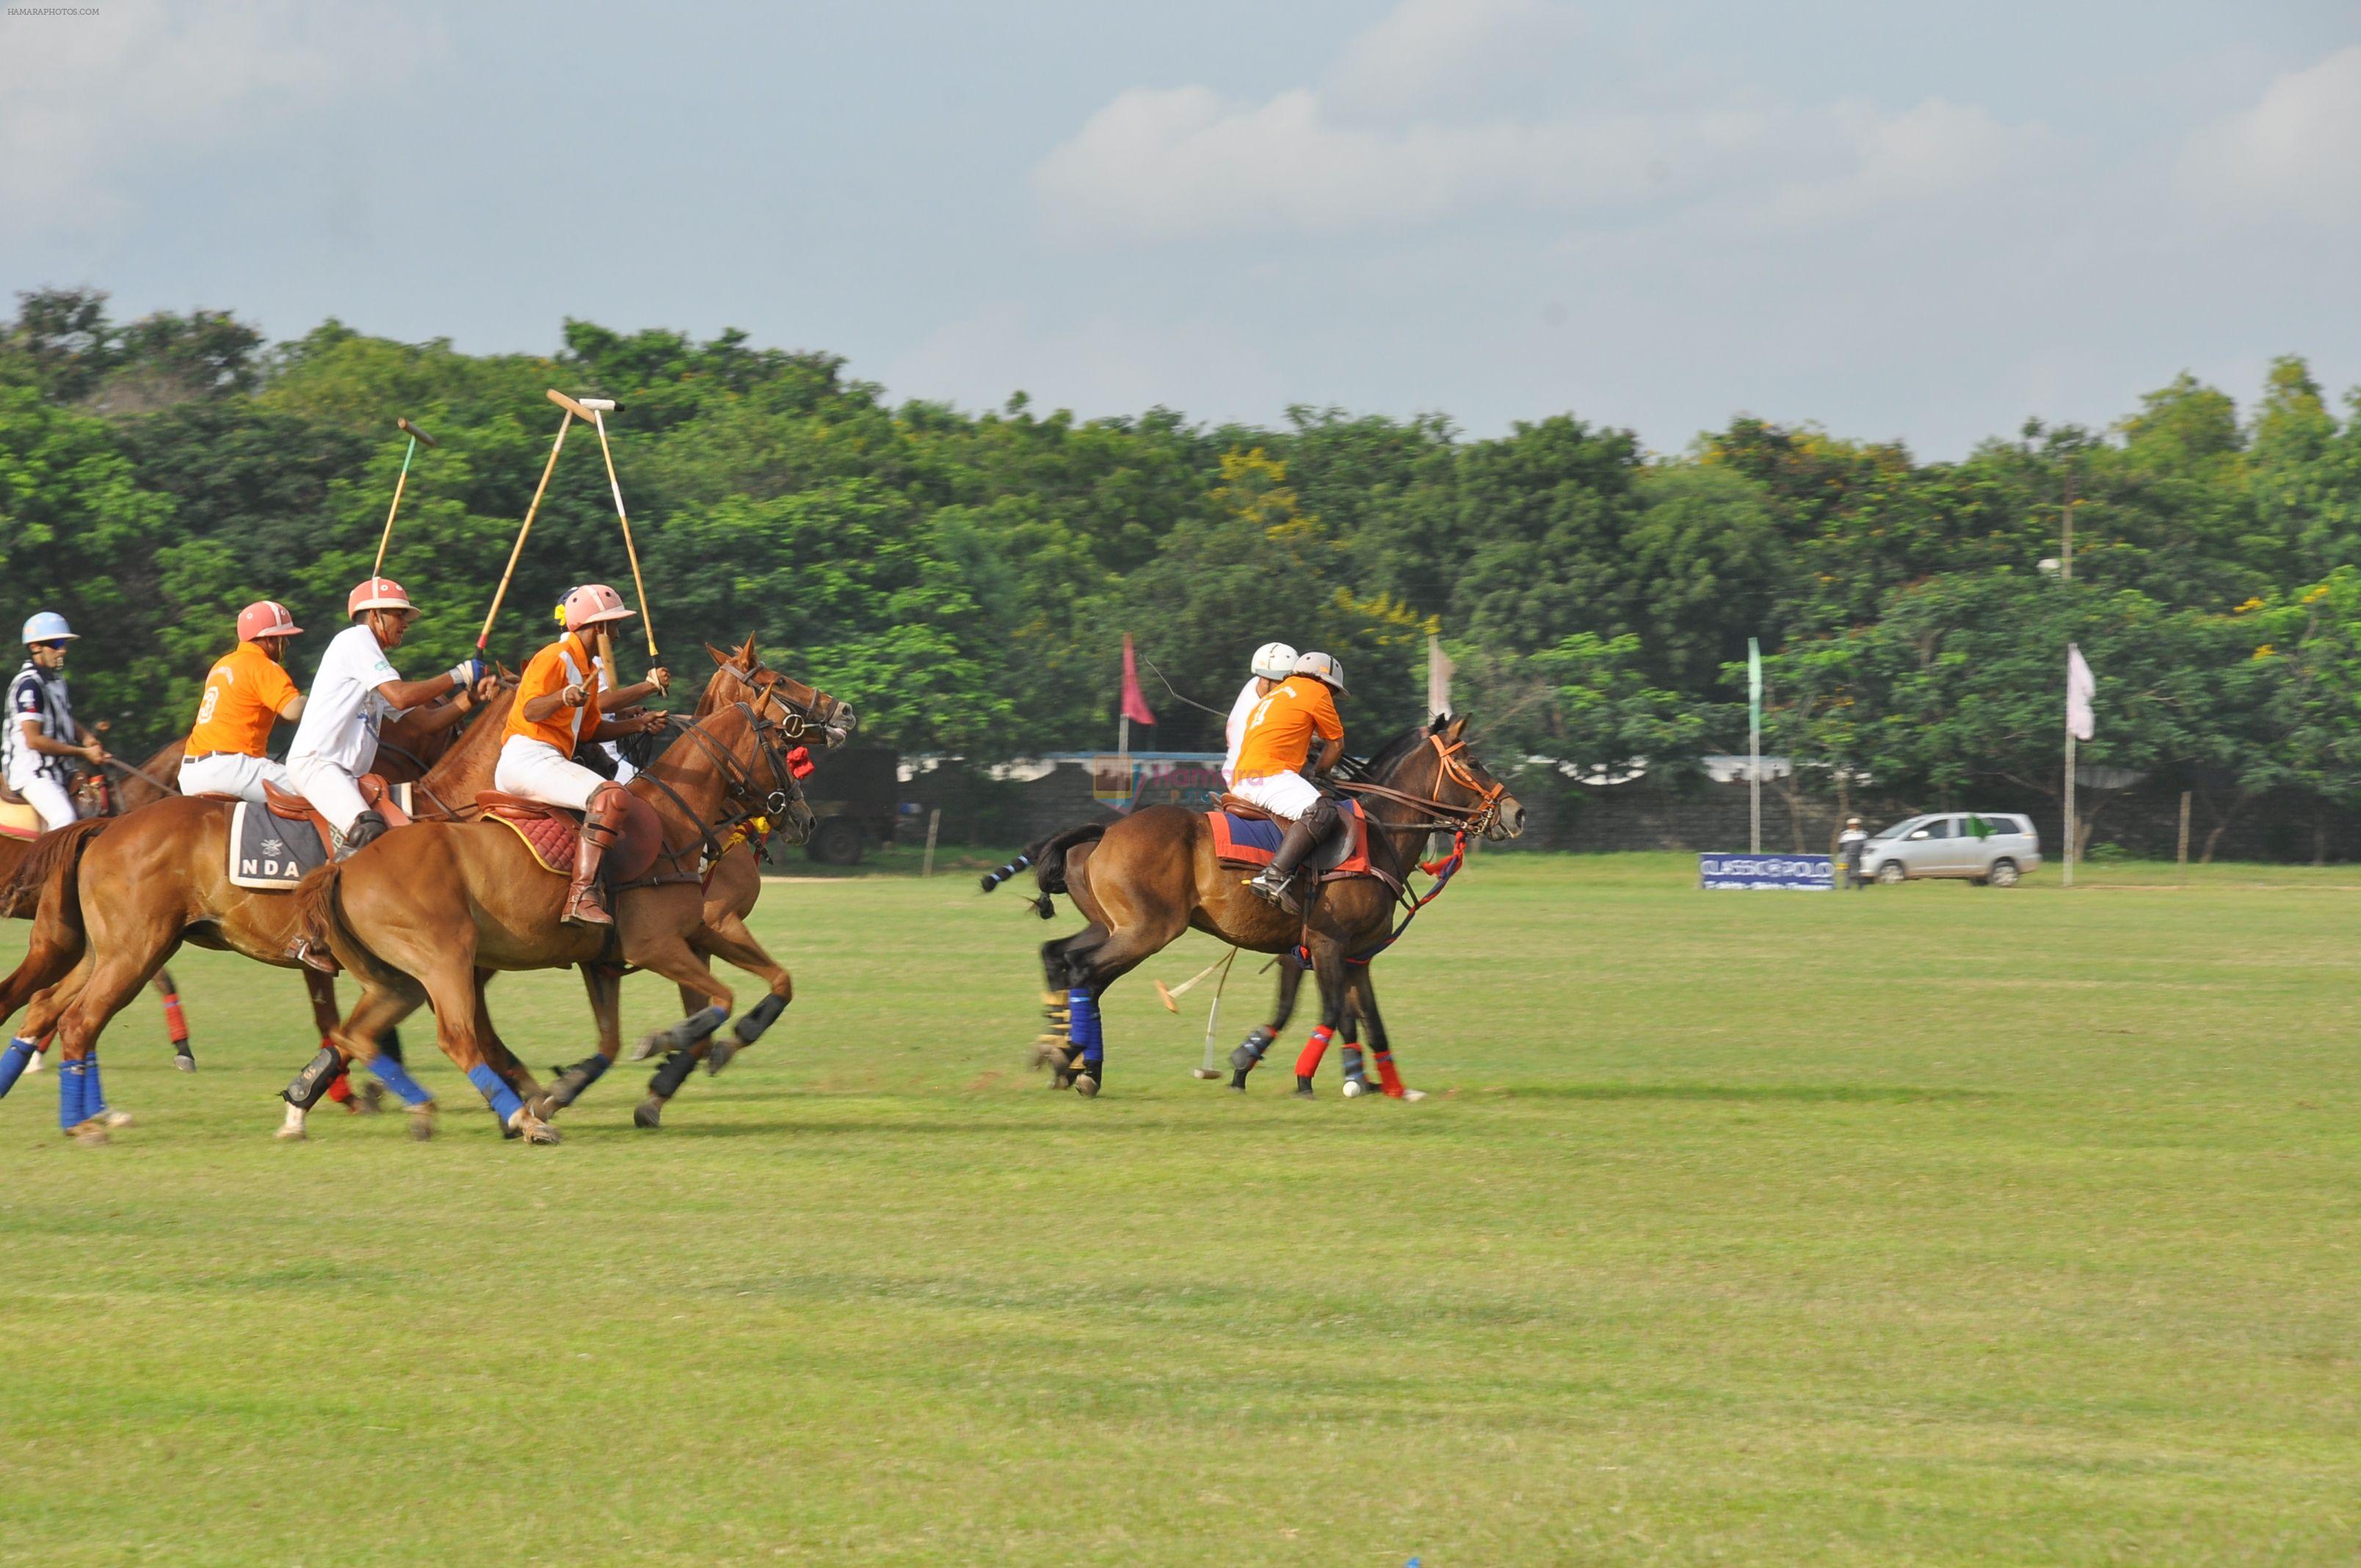 POLO Grand Final Event on 17th September 2011